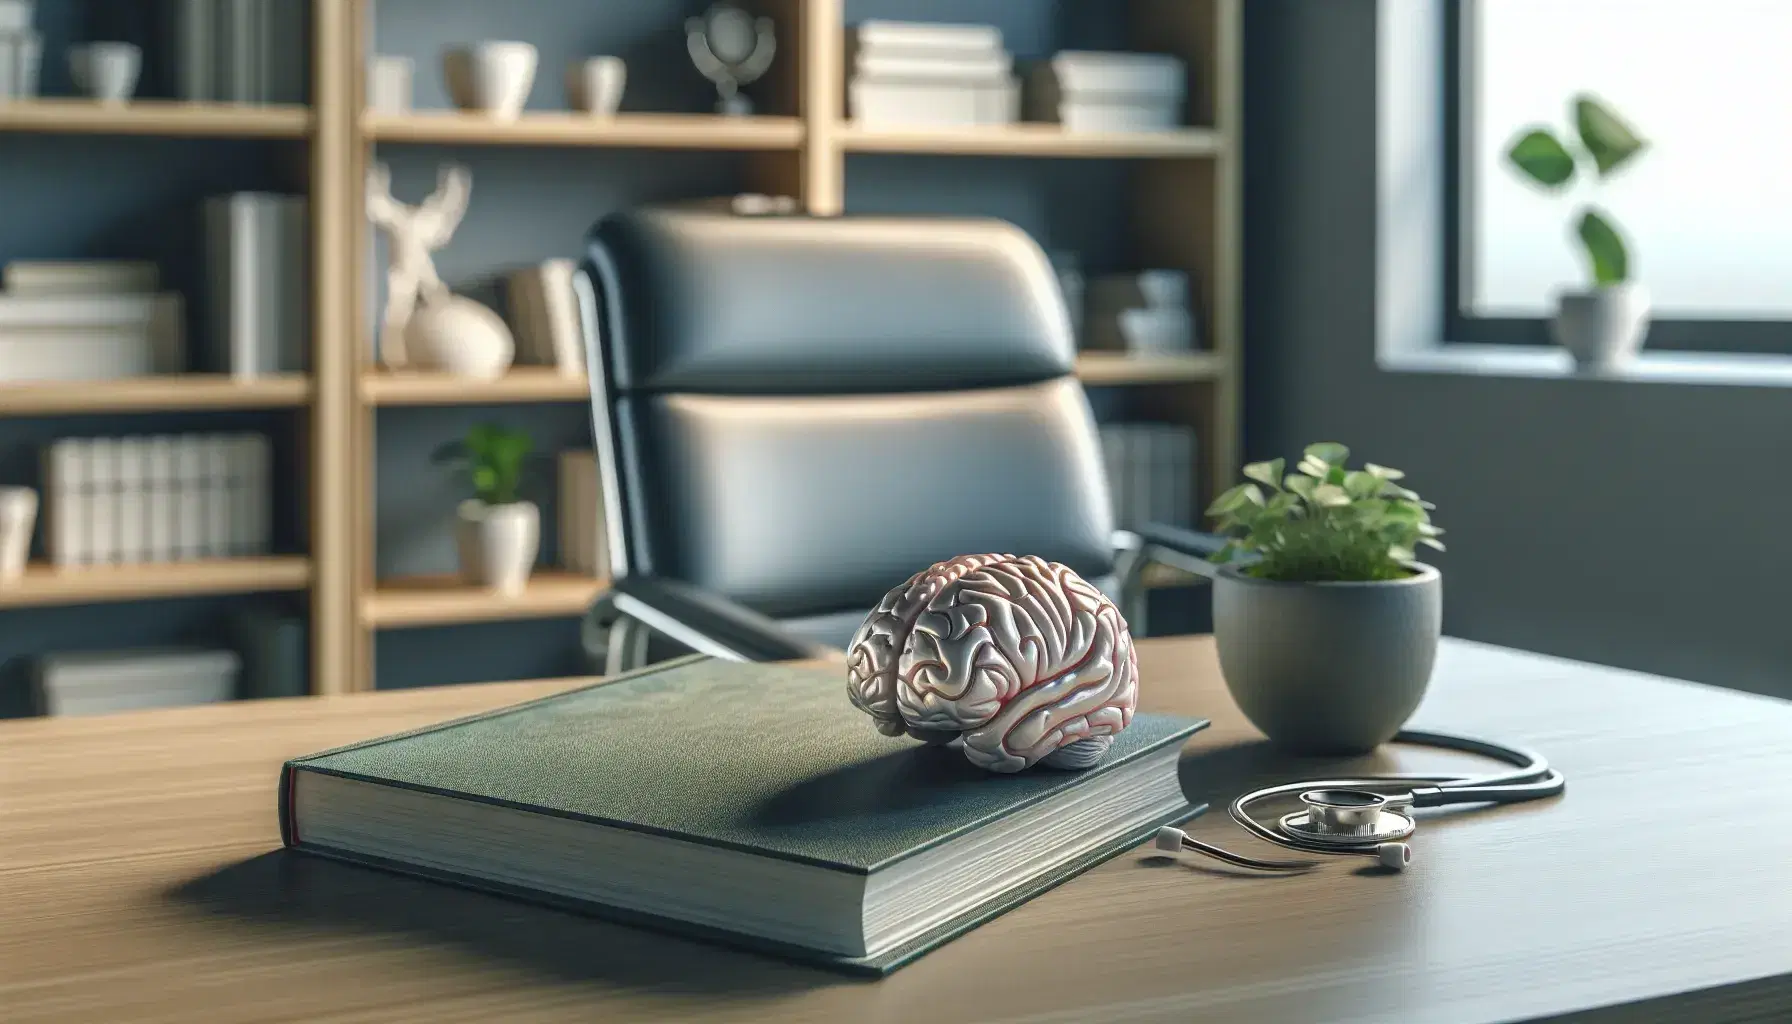 Anatomical model of human brain on wooden desk next to open book in a medical office, with empty chair and blurry green plant in the background.